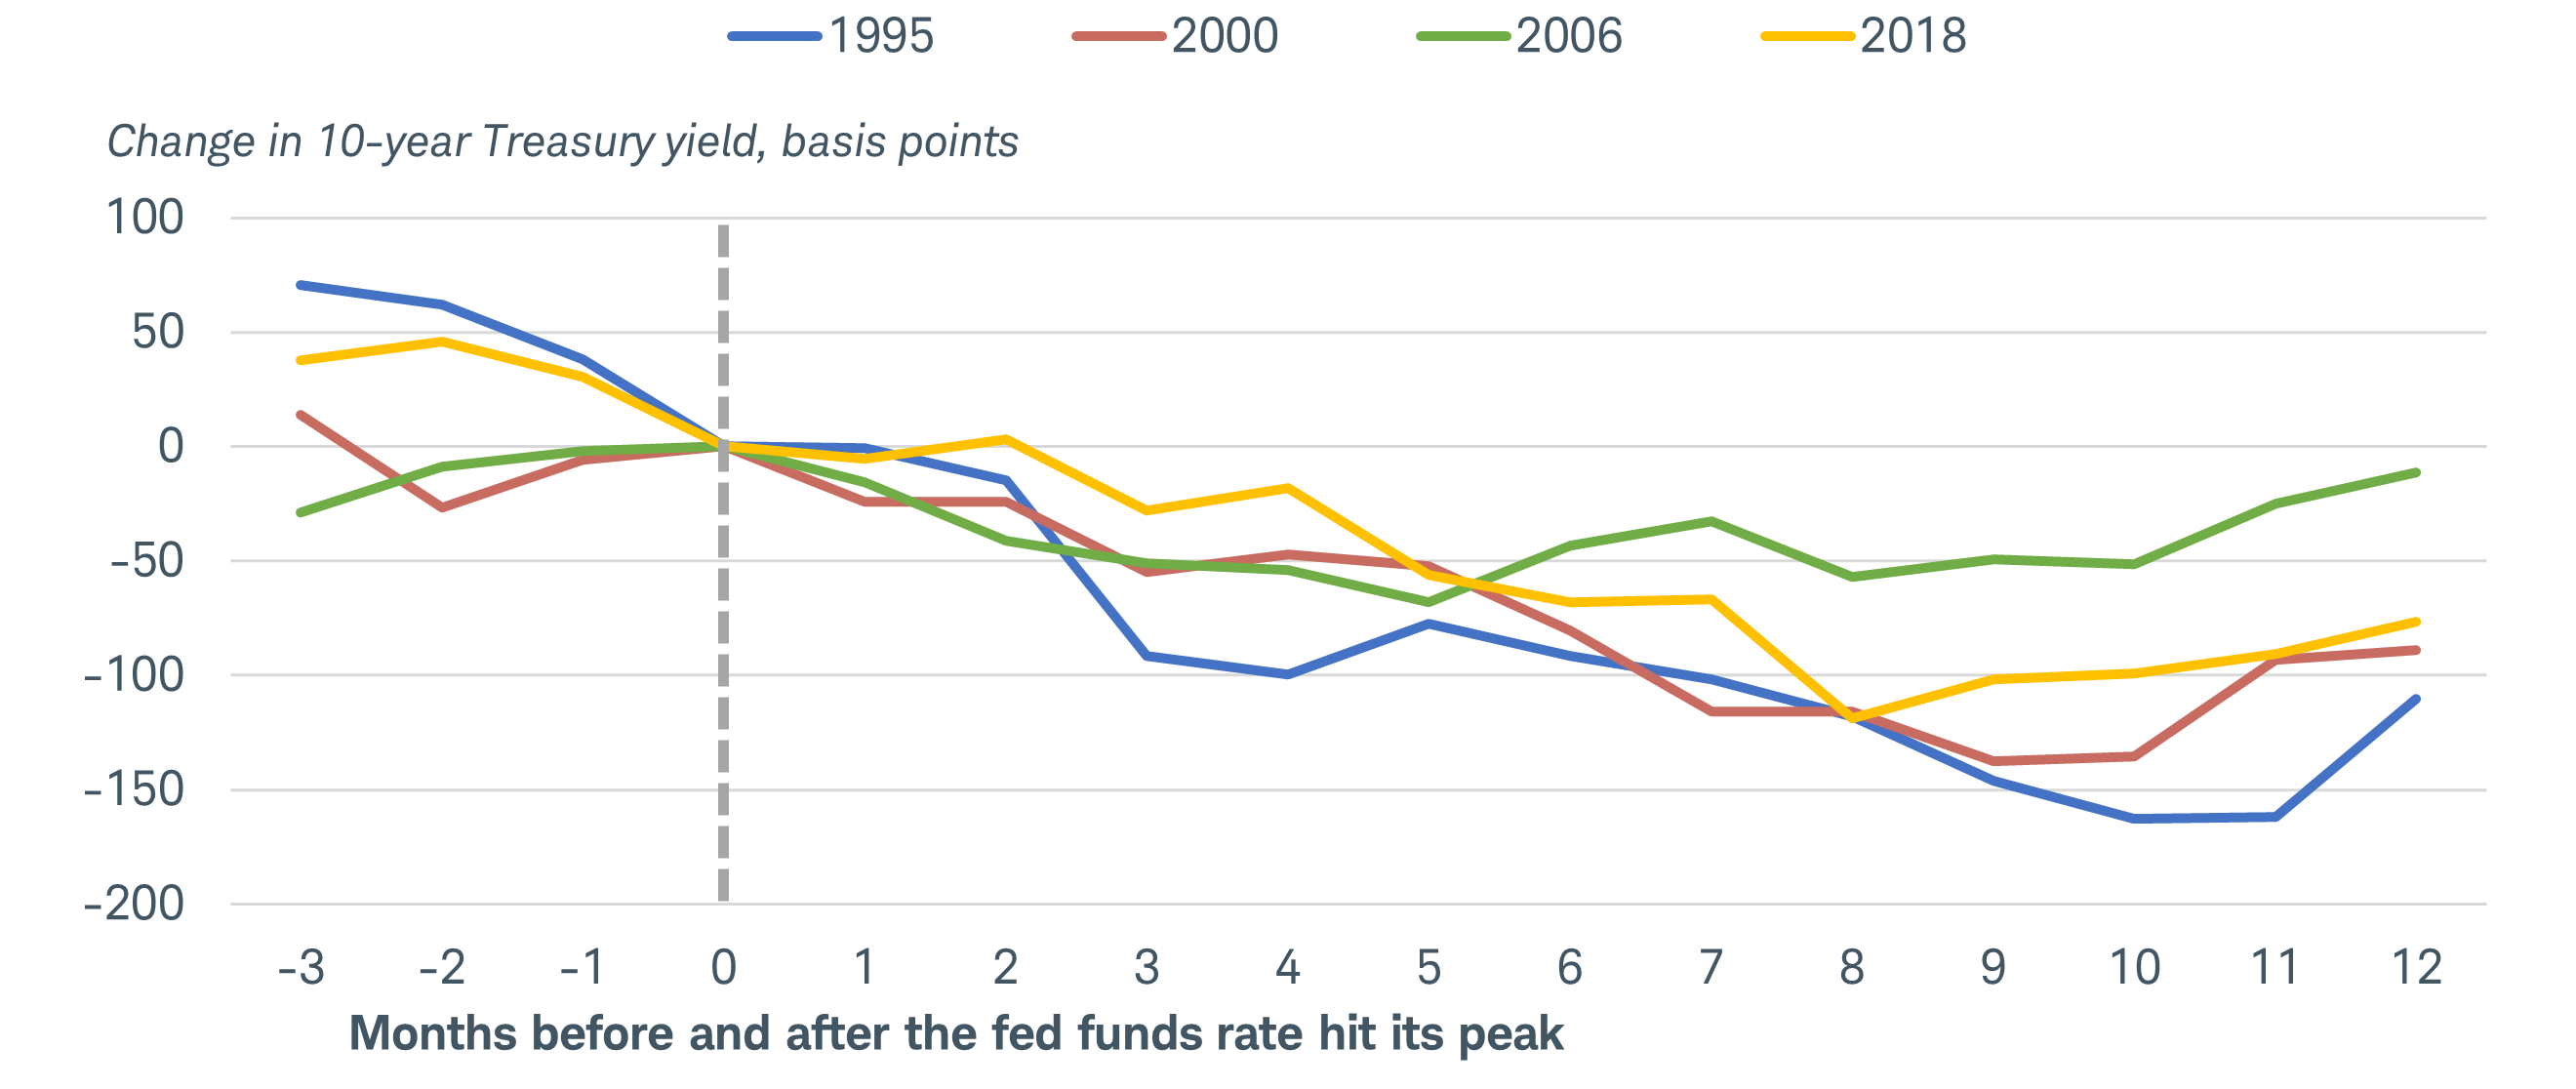 Chart shows the change in the 10-year Treasury yield during the months before and after the federal funds rate reached its peak in 1995, 2000, 2006 and 2018.